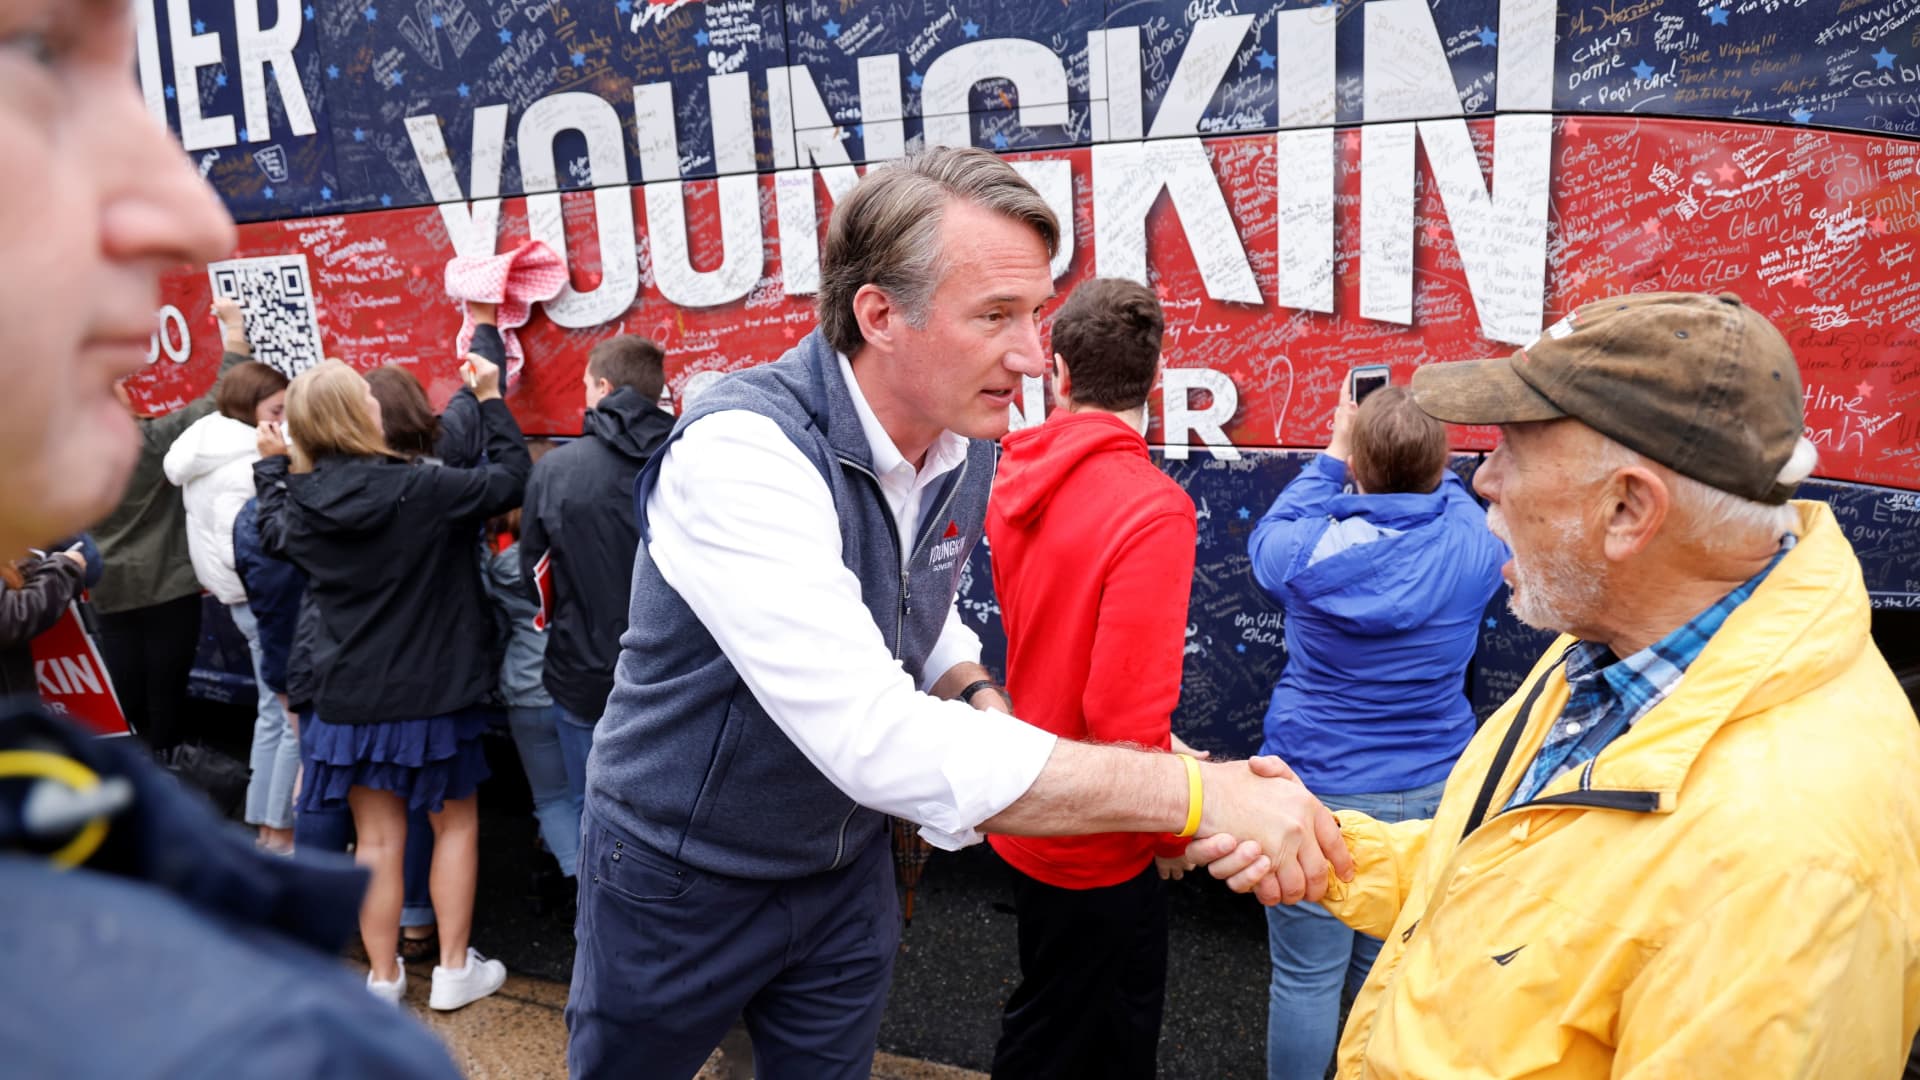 Republican candidate for governor of Virginia Glenn Youngkin greets supporters after a campaign event in Charlottesville, Virginia, U.S. October 29, 2021.